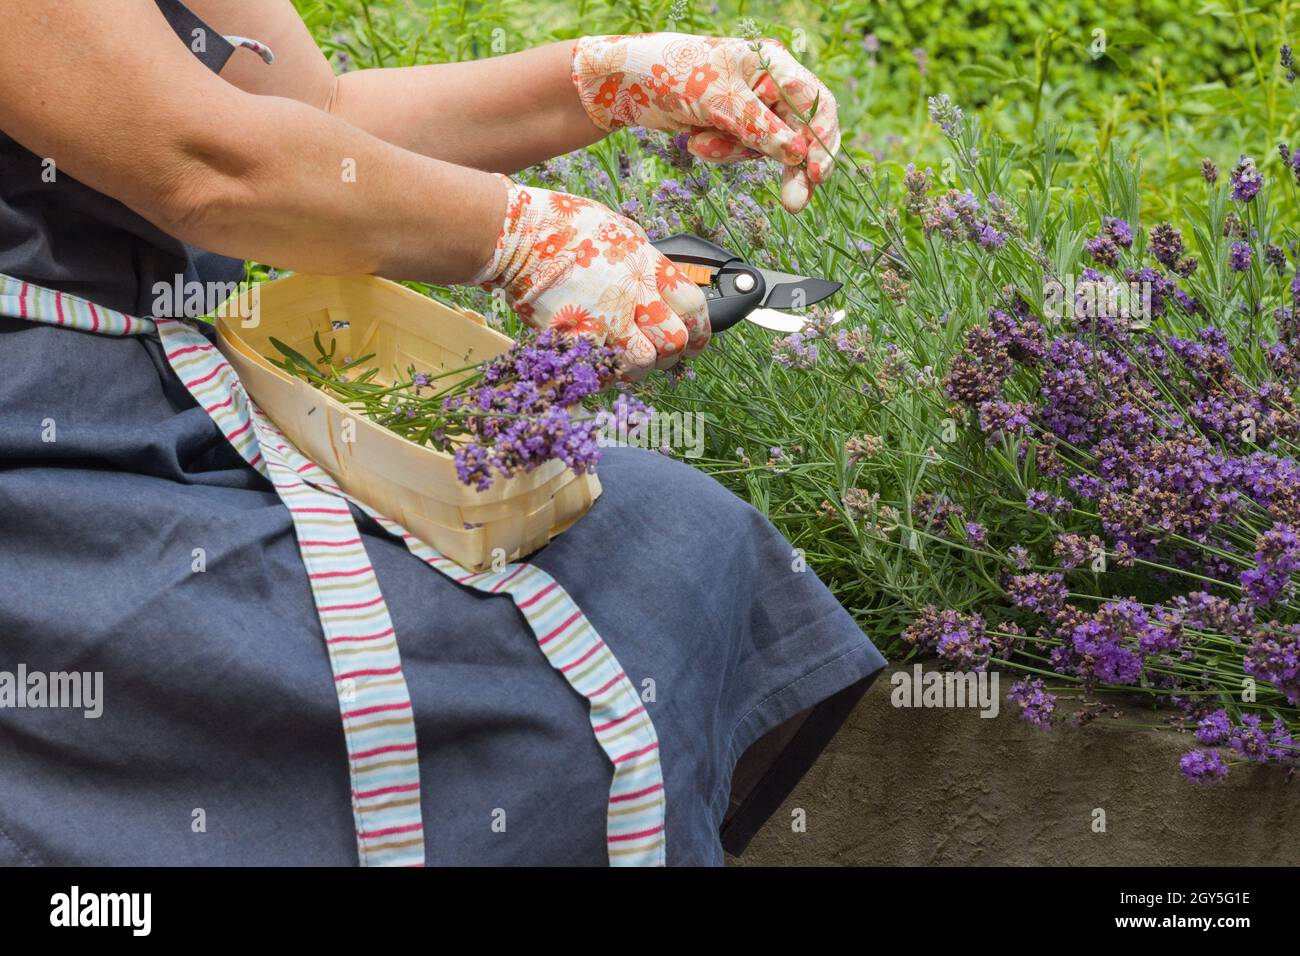 Close-up of female hands in gardening gloves holding a pruner and pruning a lavender bush. A wicker basket with cut lavender lies on a woman's lap. Se Stock Photo